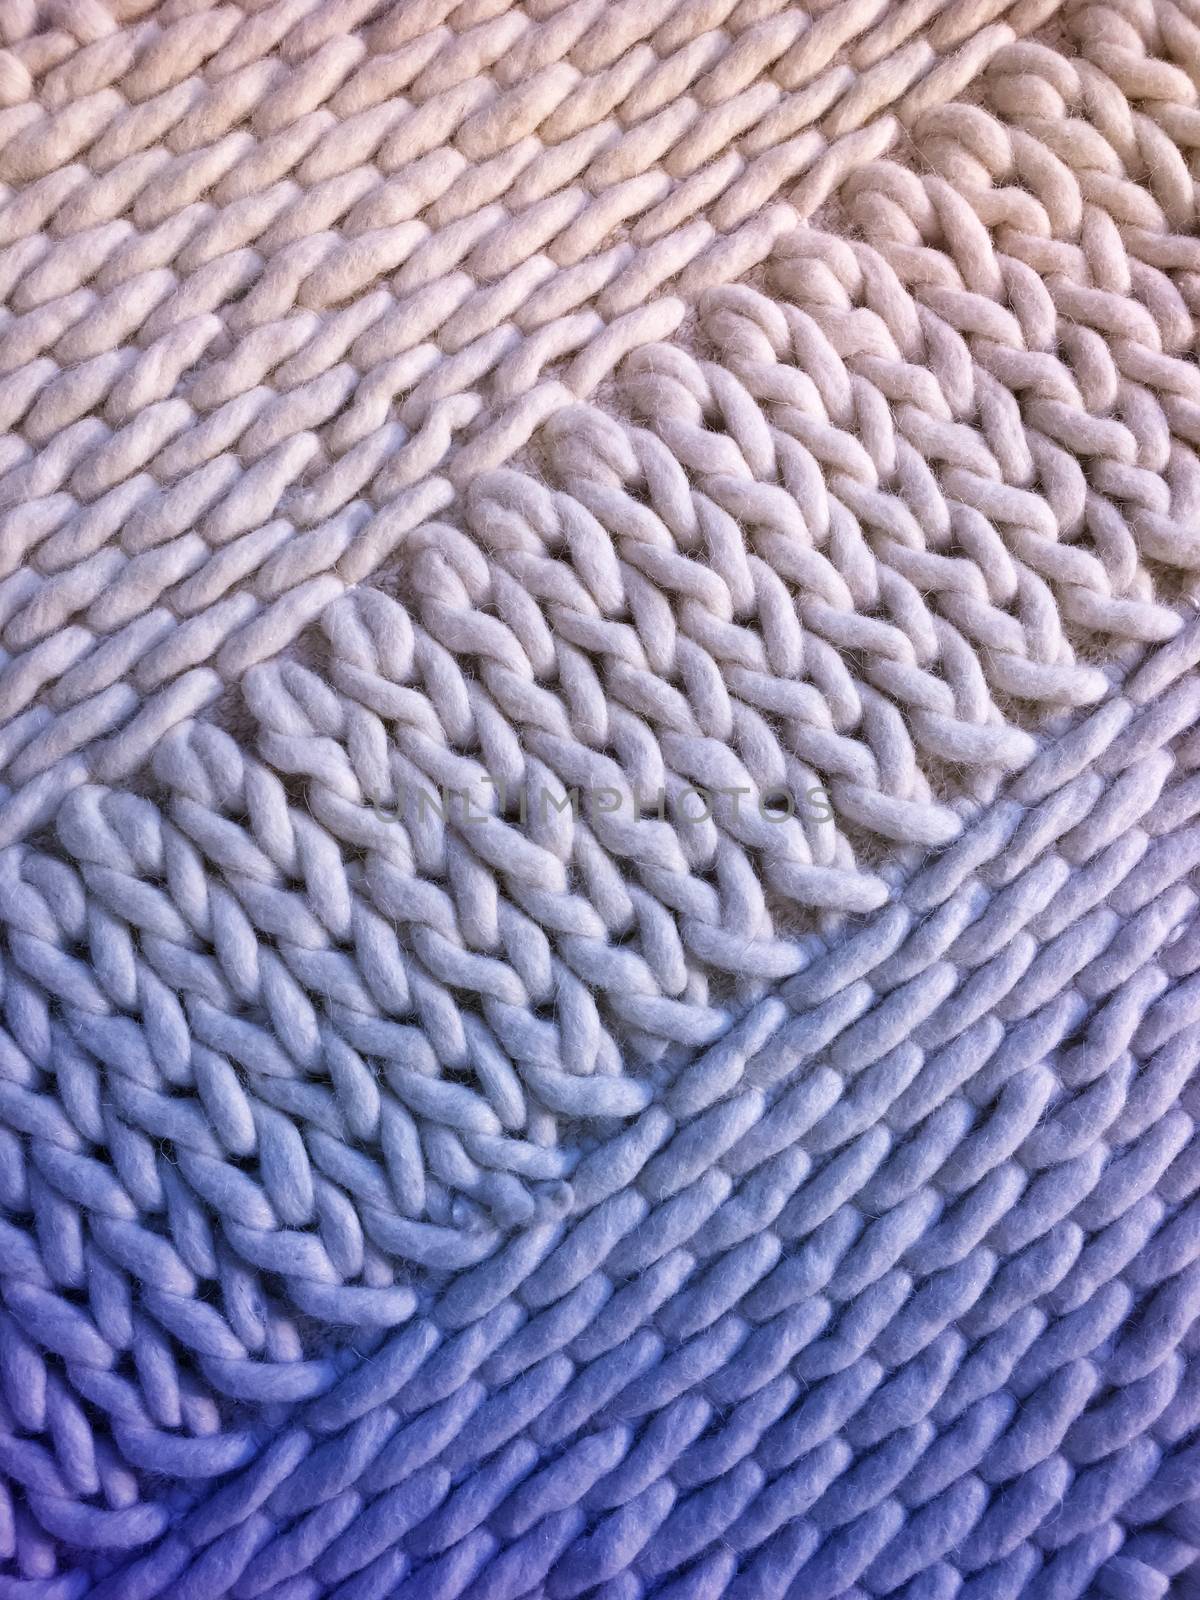 White and blue handmade knitted background with simple design.